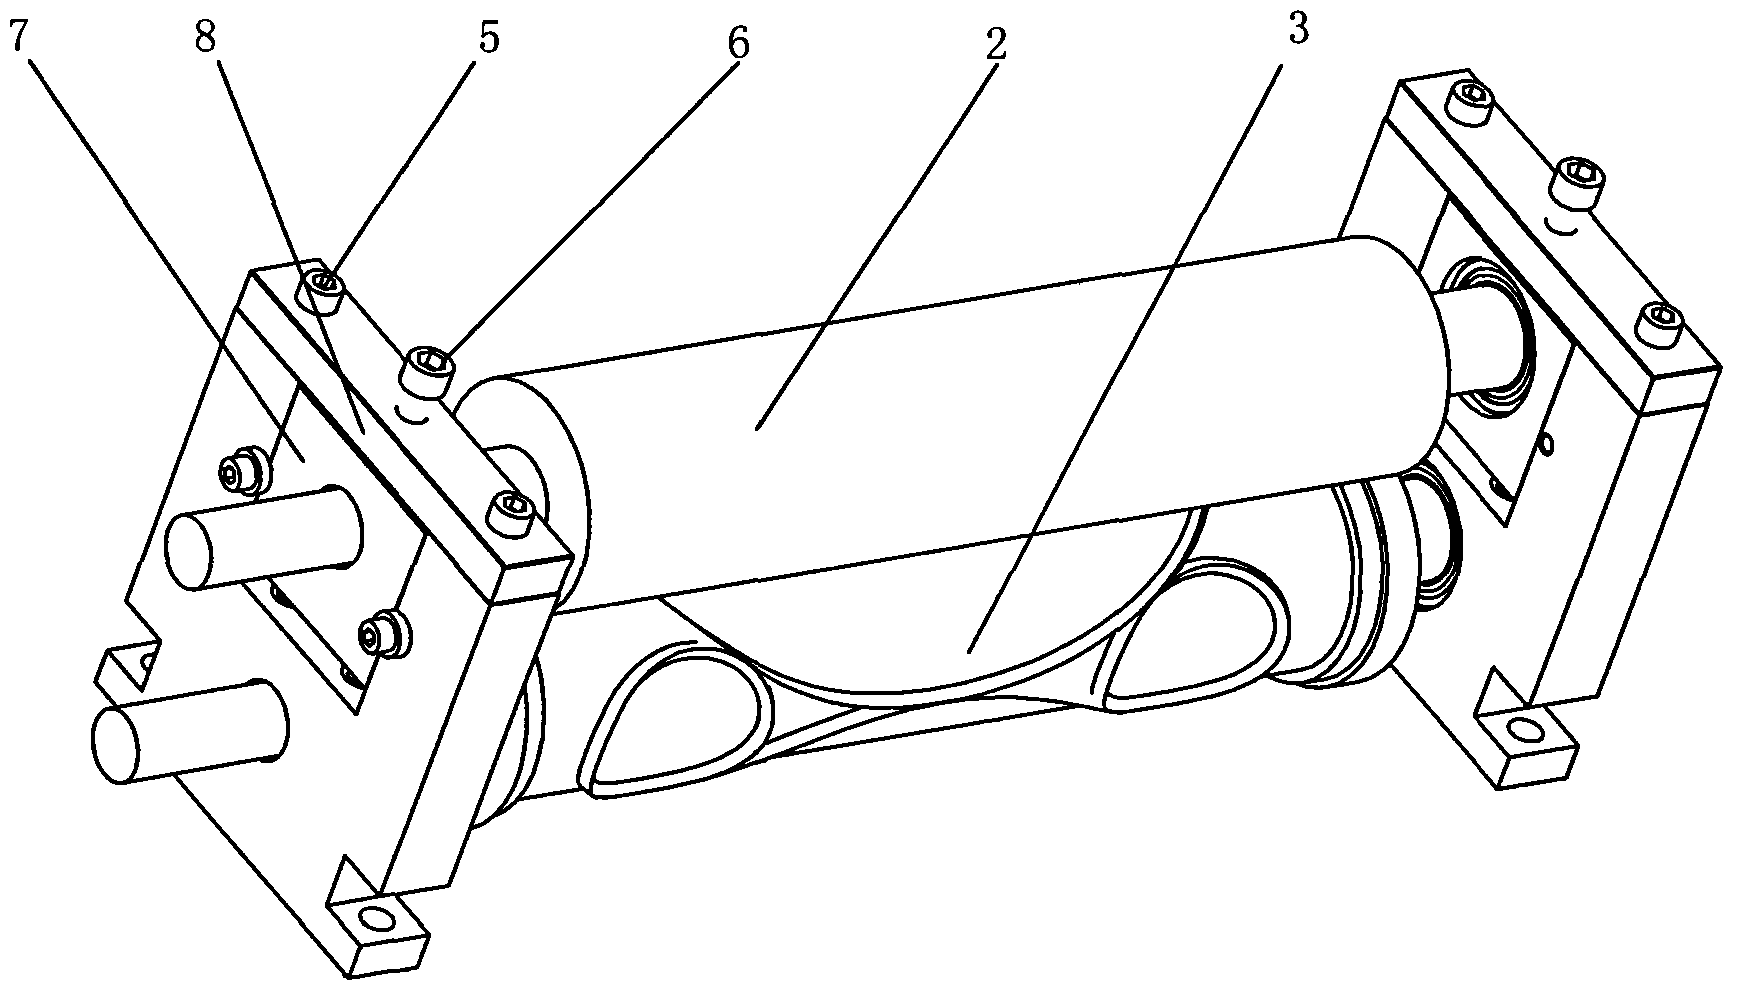 Slice food pressing and cutting device